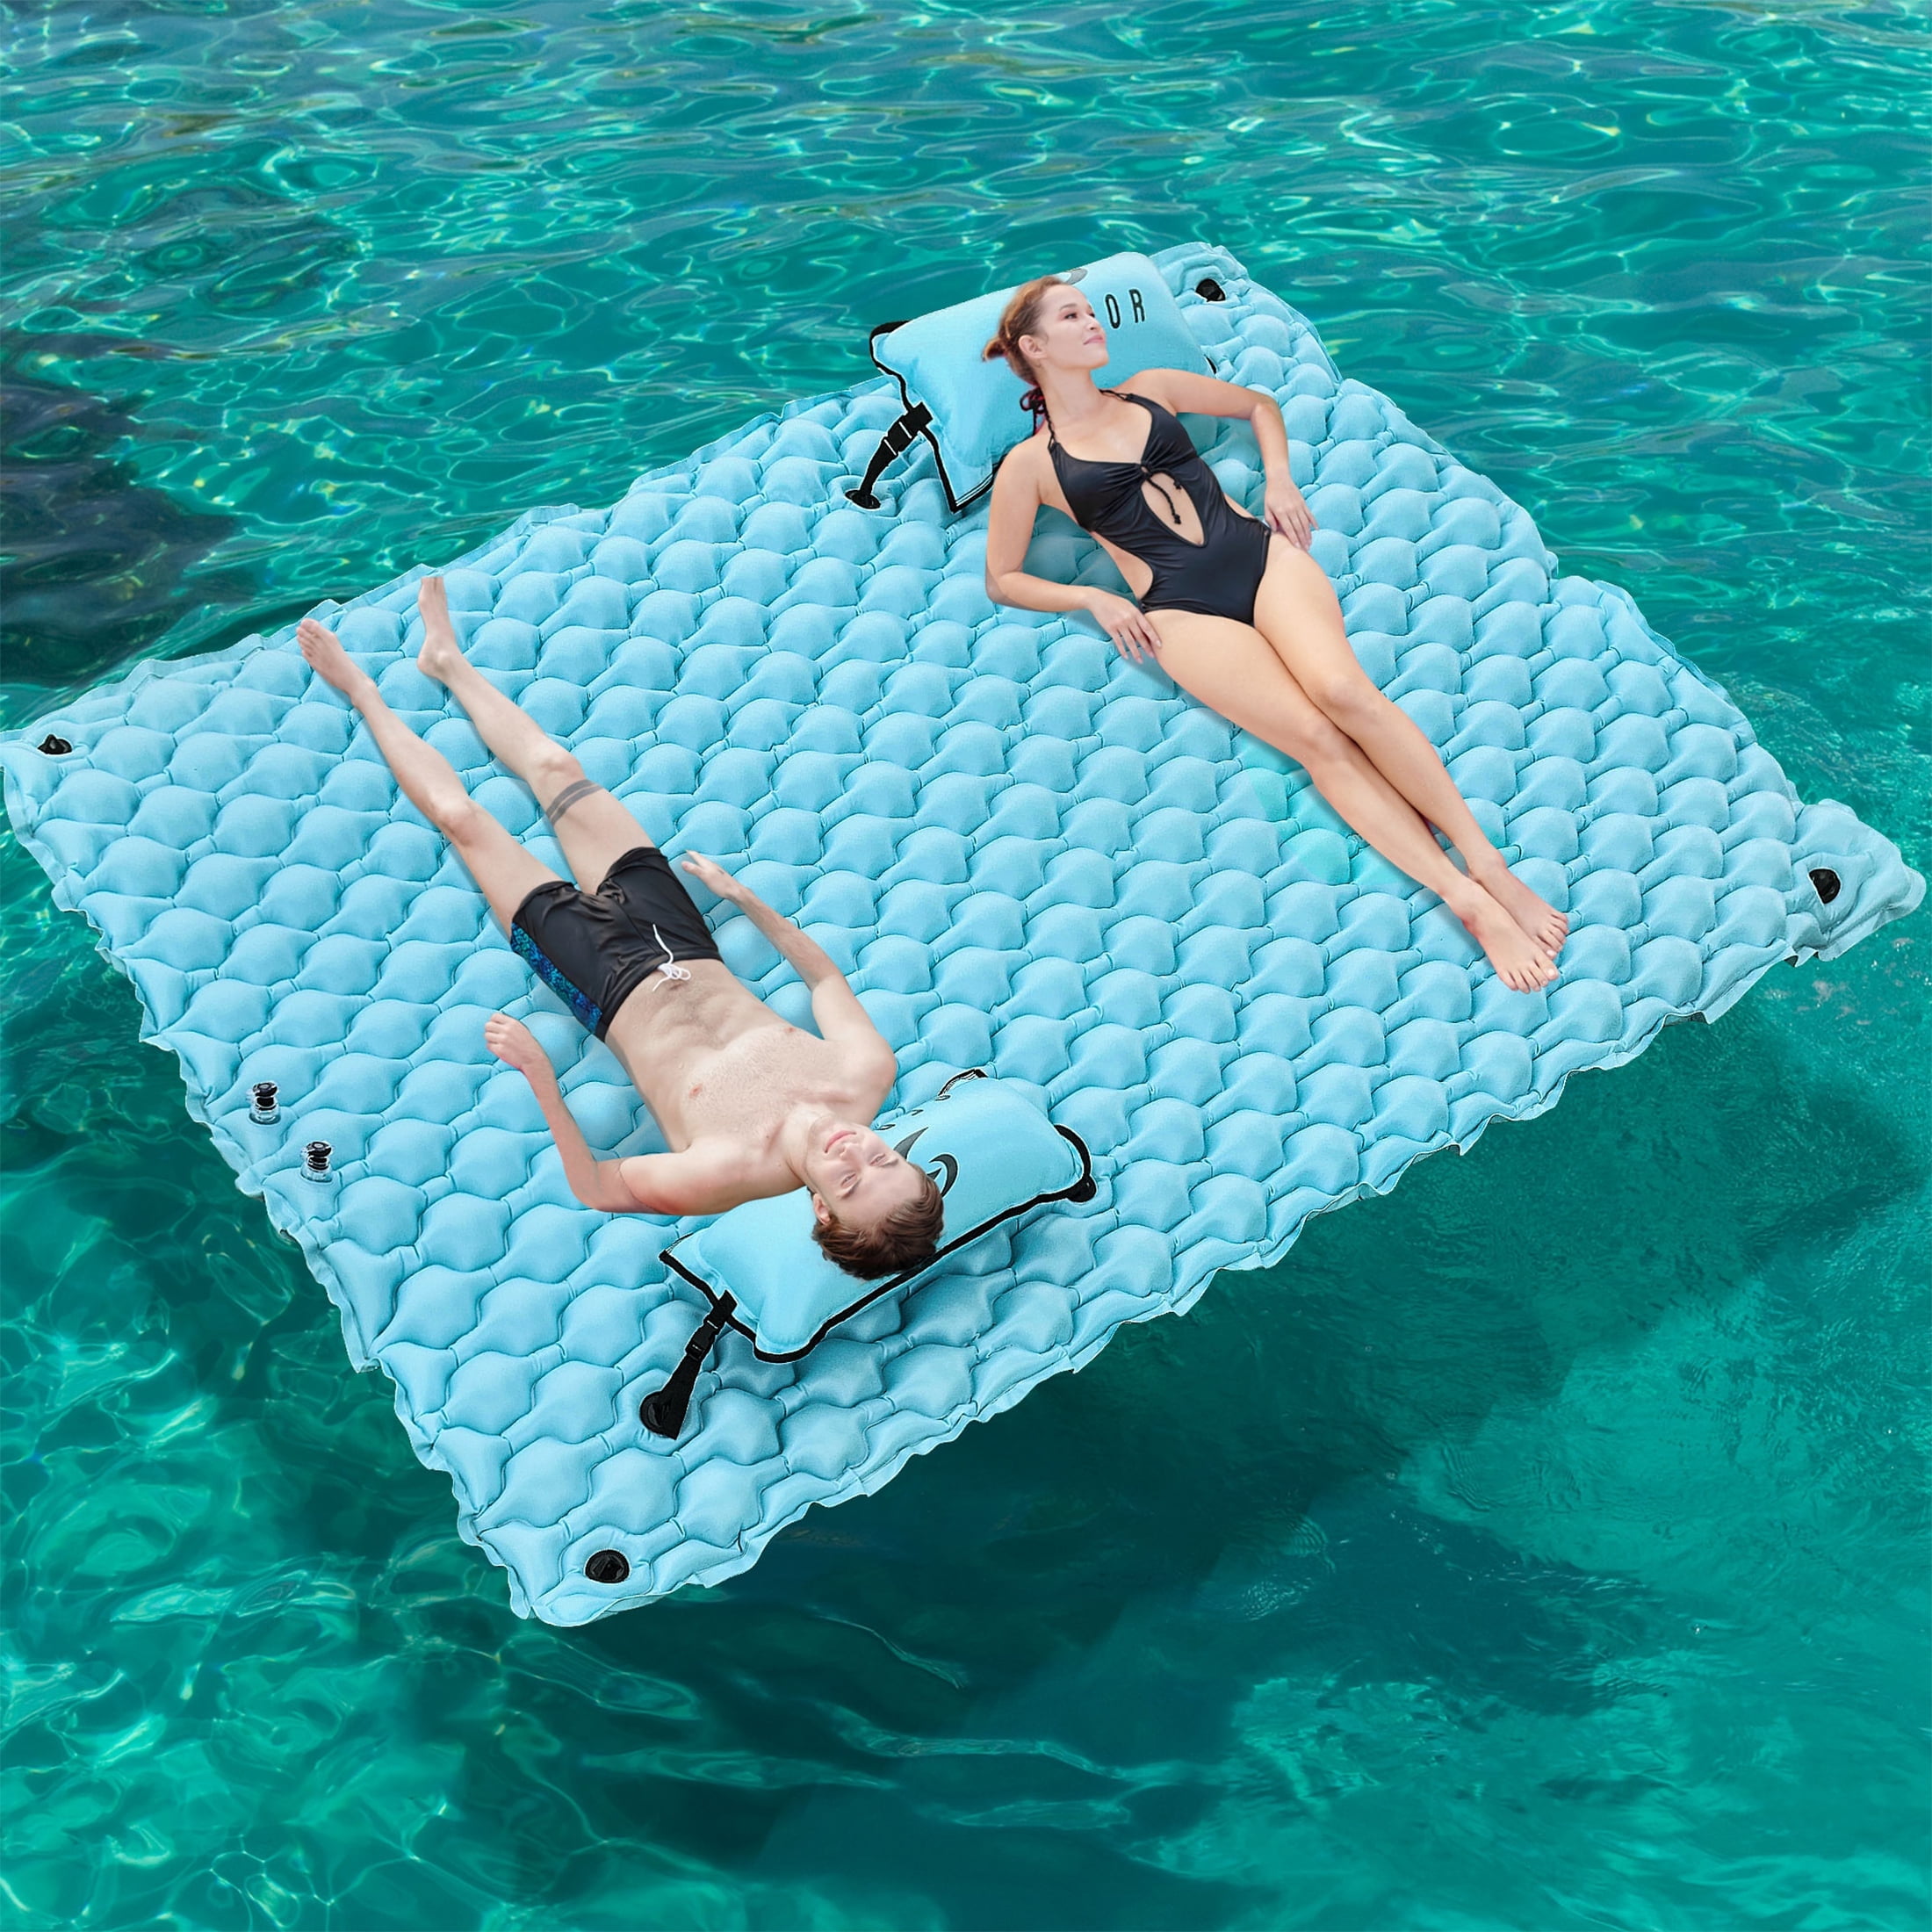 Sebor Lake Floats With Pool Hammock 72 Inchx Inch Giant Inflatable Floating Mat For Boating Beach Island Swimming Party